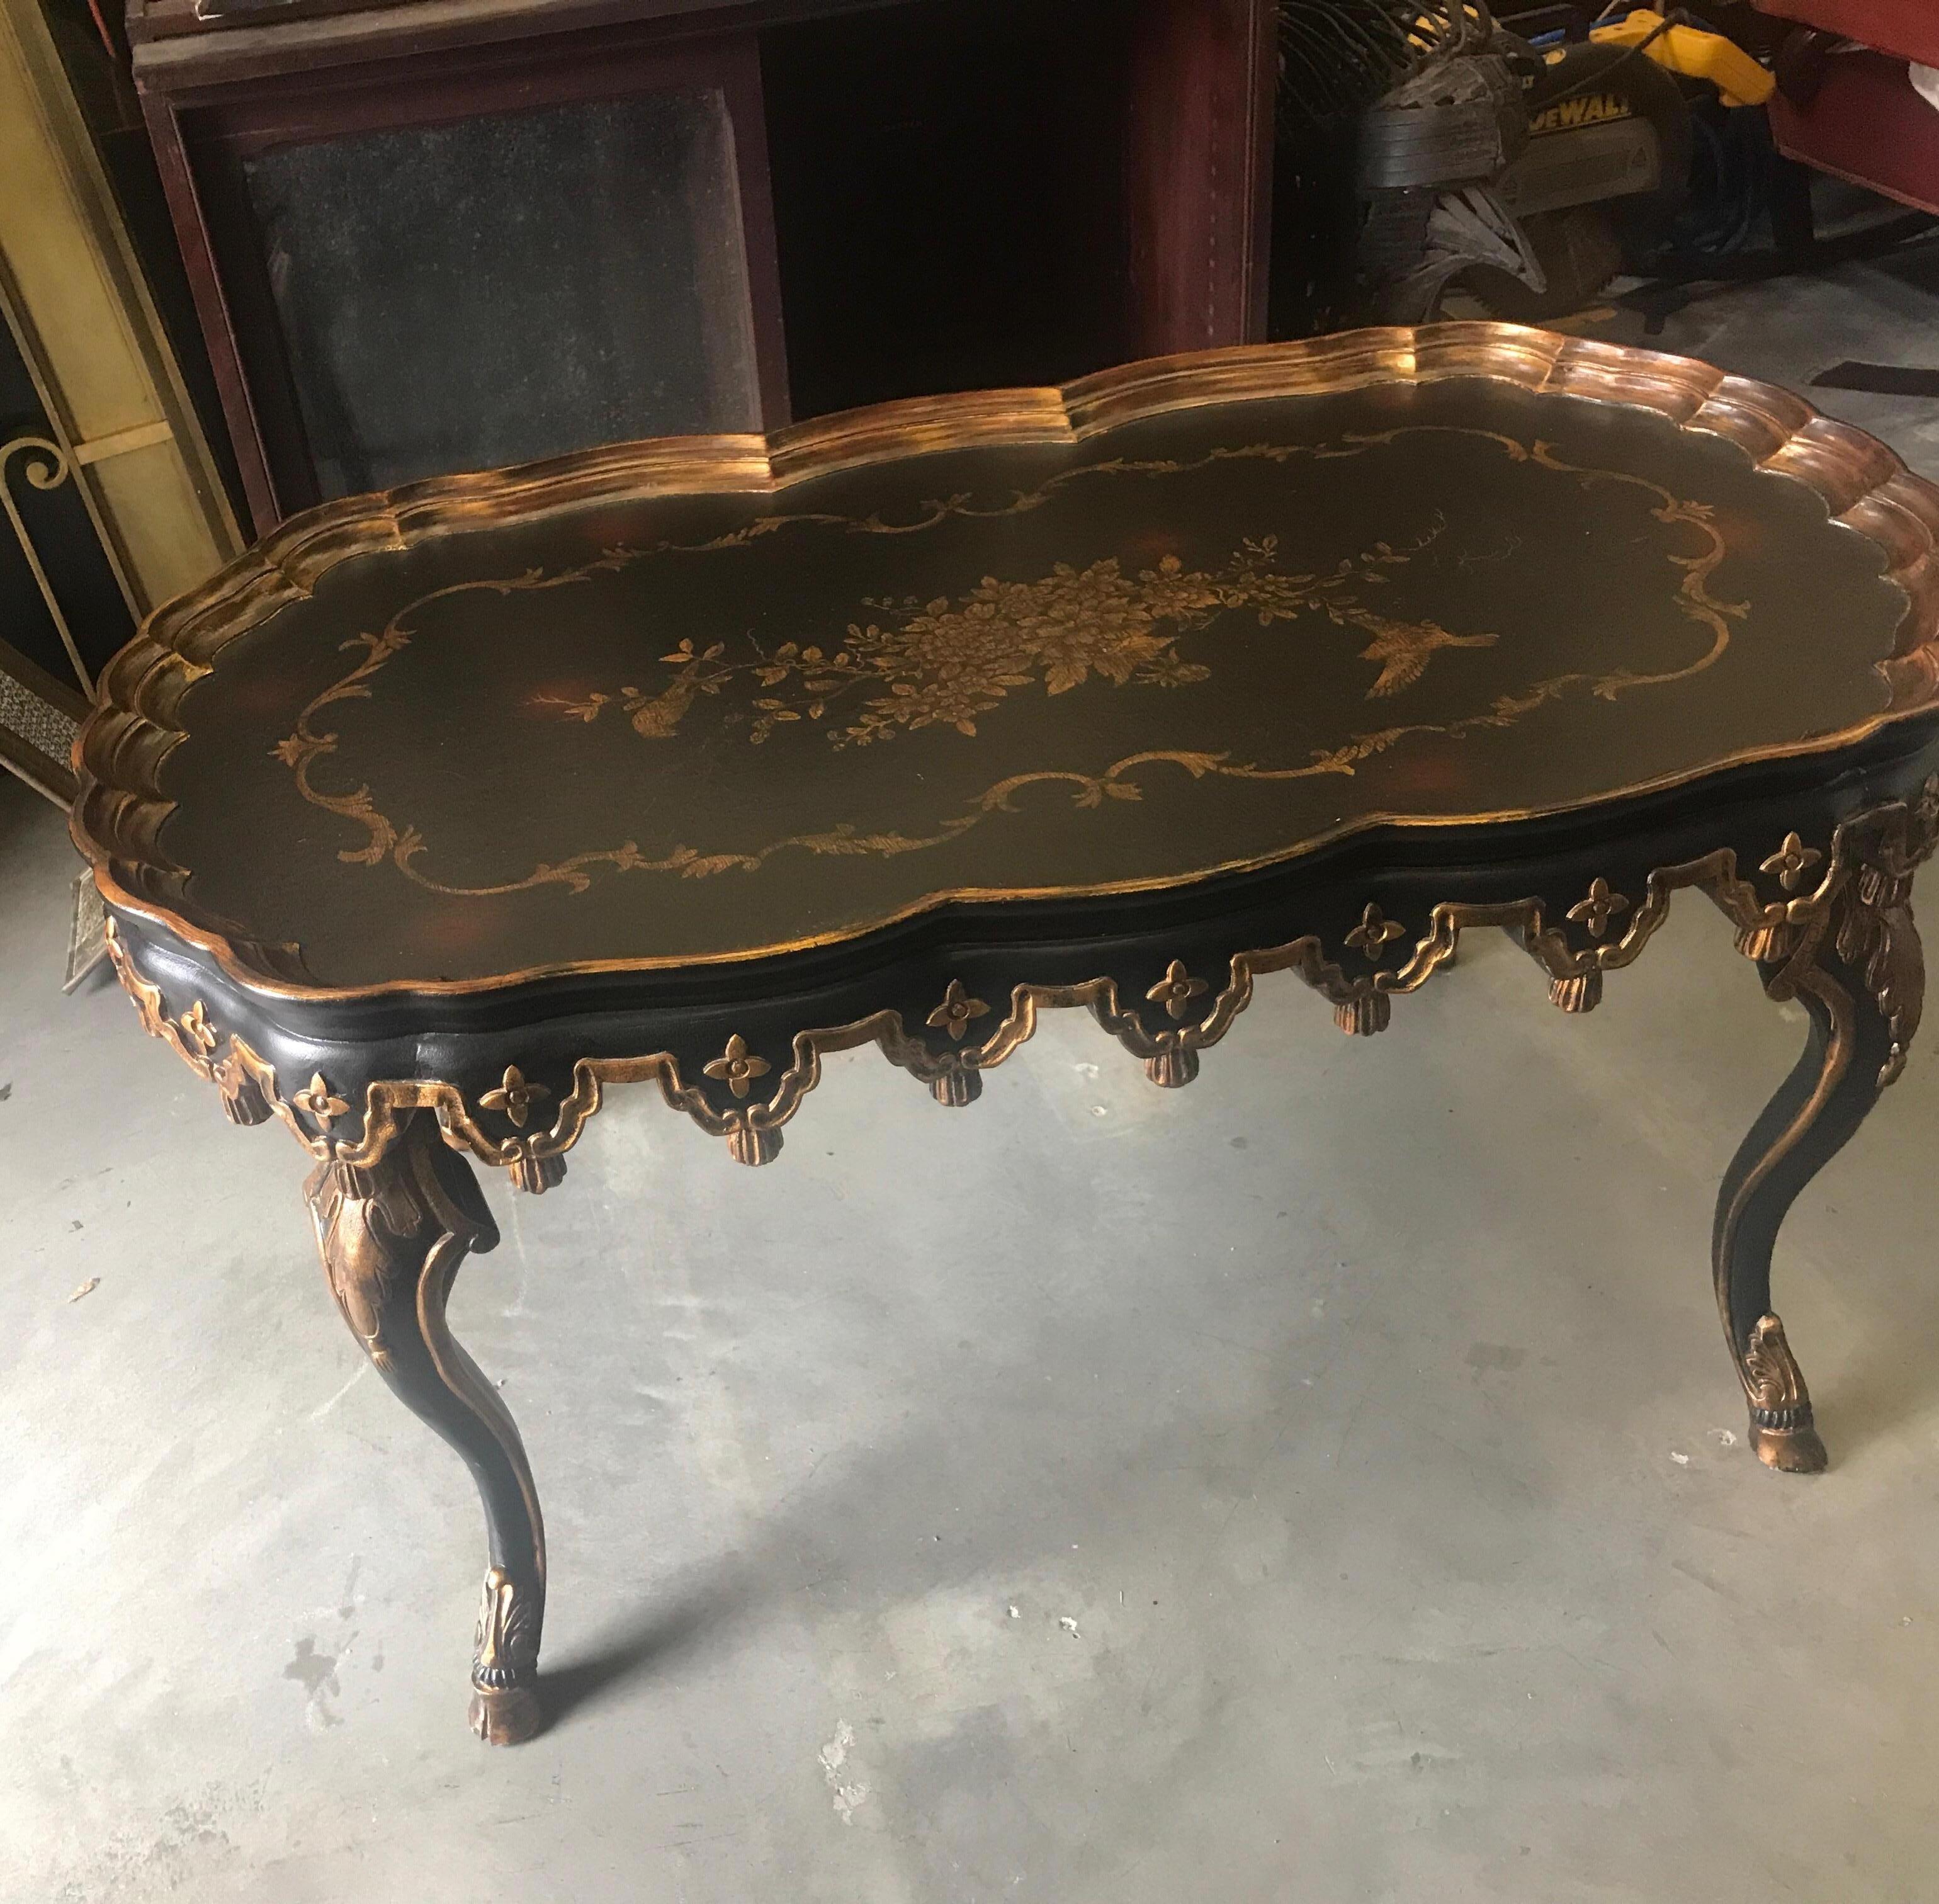 High style gilt decorated coffee table with crackled black background. The scalloped tray style edge with nicely detailed aprin resting on four curvaceous legs.